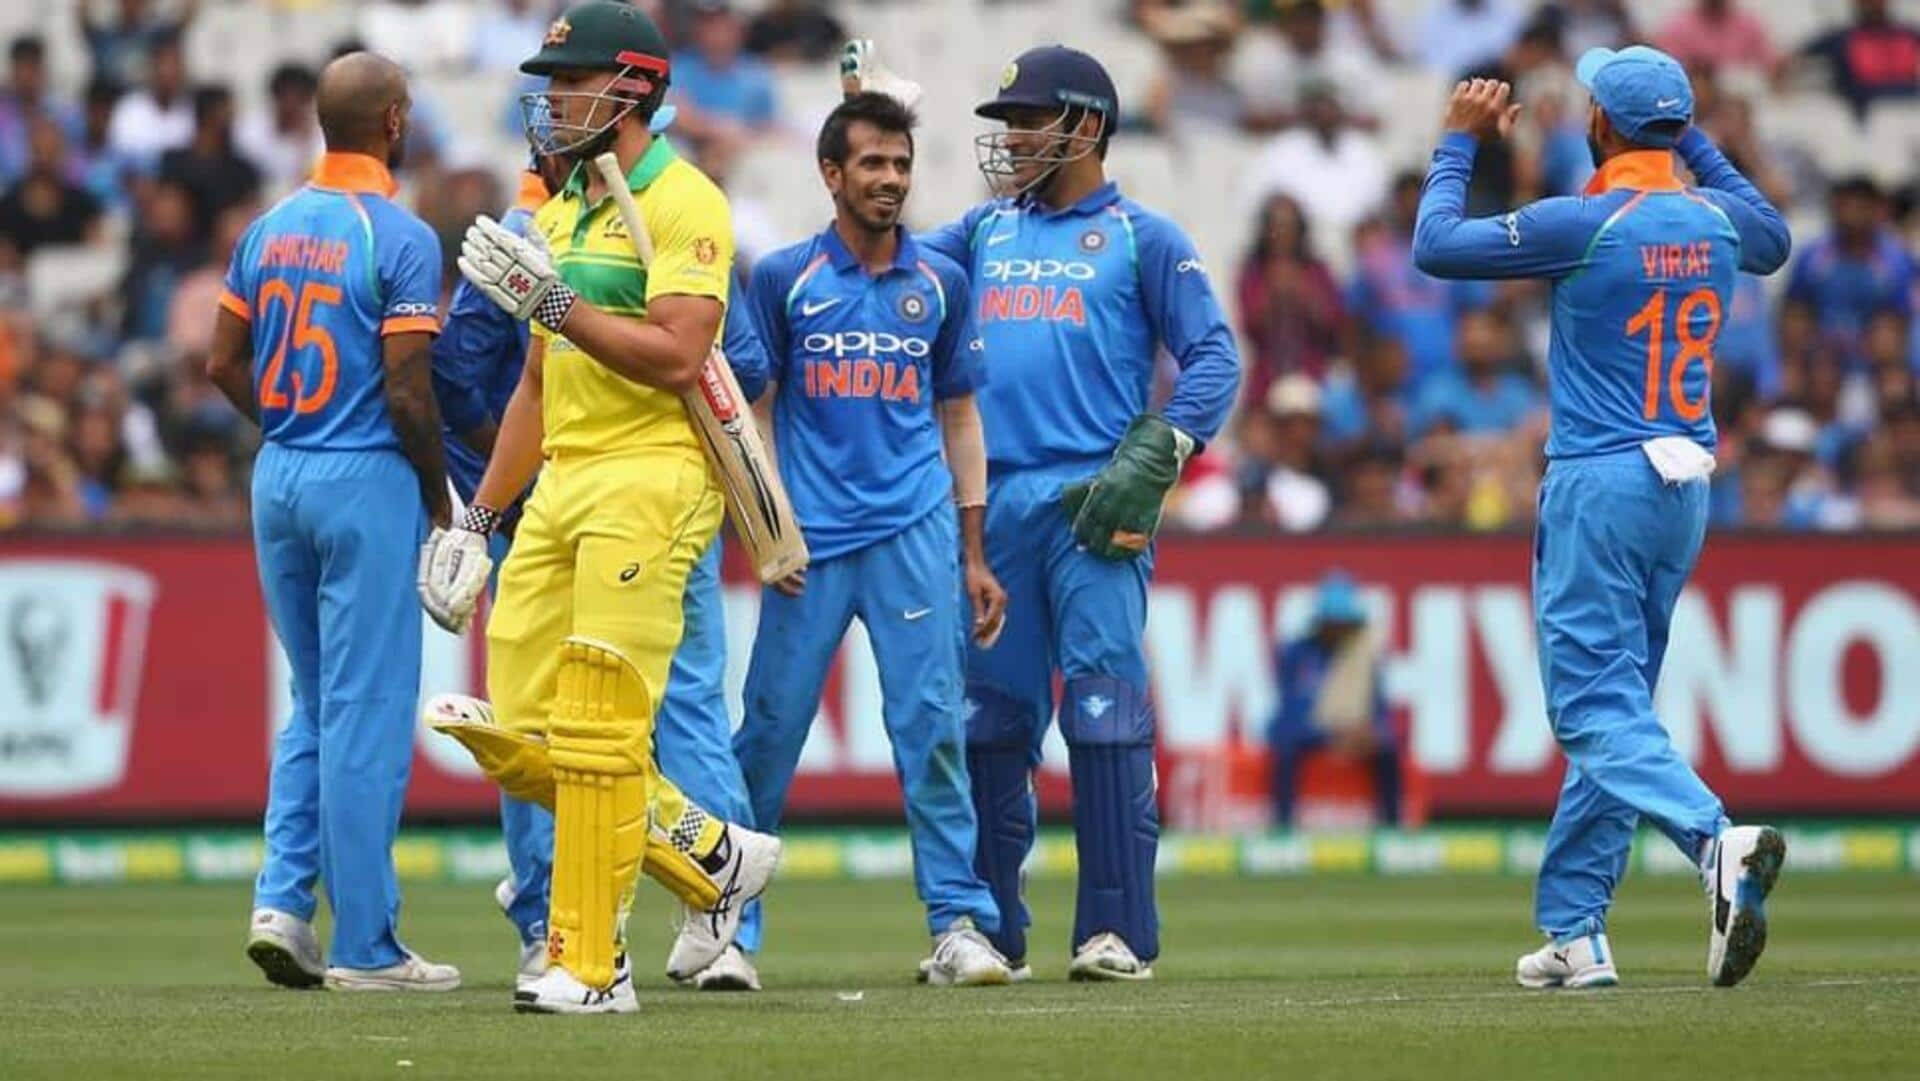 Revisiting iconic World Cup matches between India and Australia